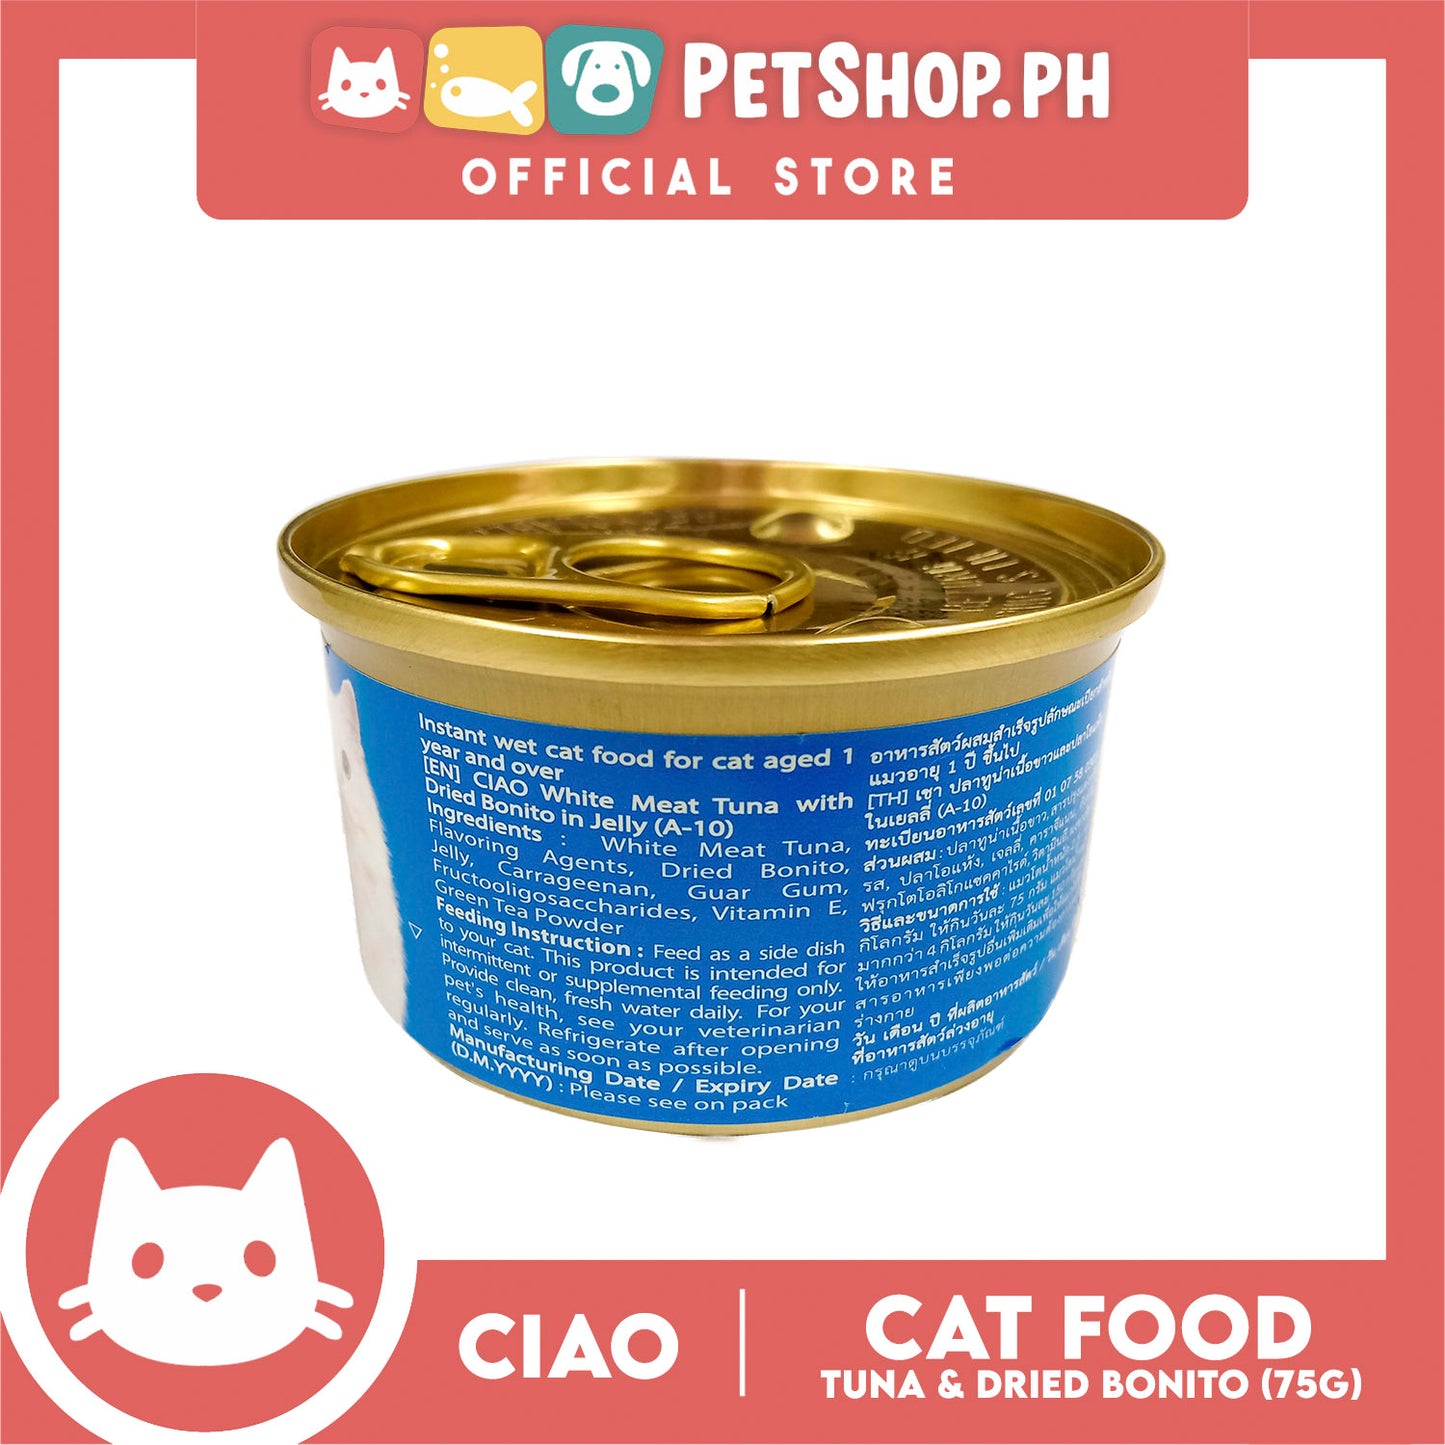 Ciao Tuna and Dried Bonito 75g Cat Canned Wet Food